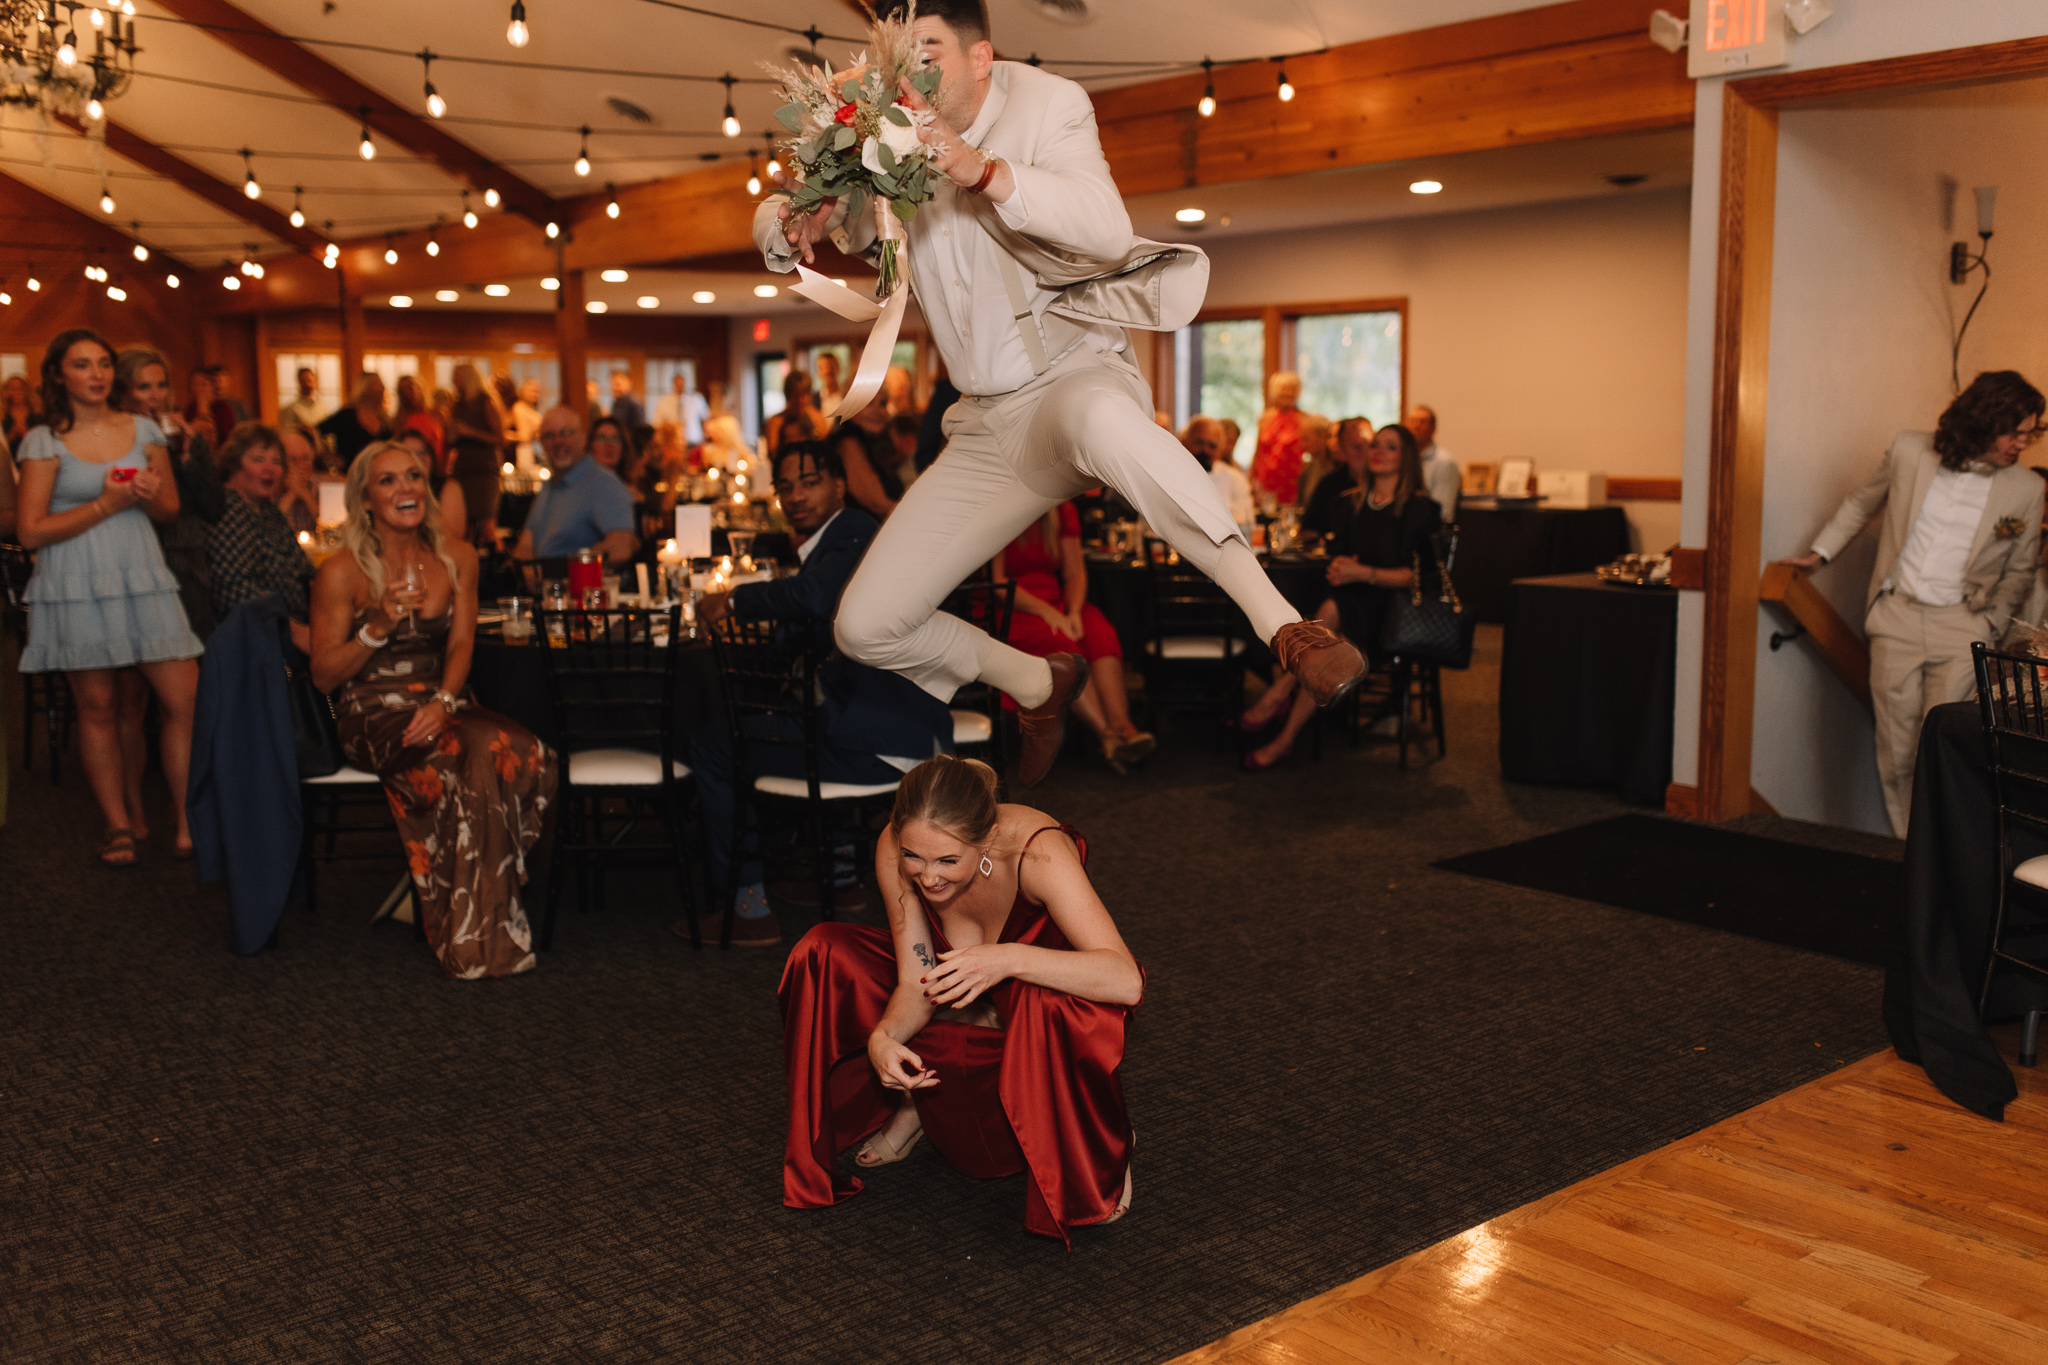 A groomsmen in a light grey suit running and jumping over a bridesmaid who is crouched down for their grand entrance moment